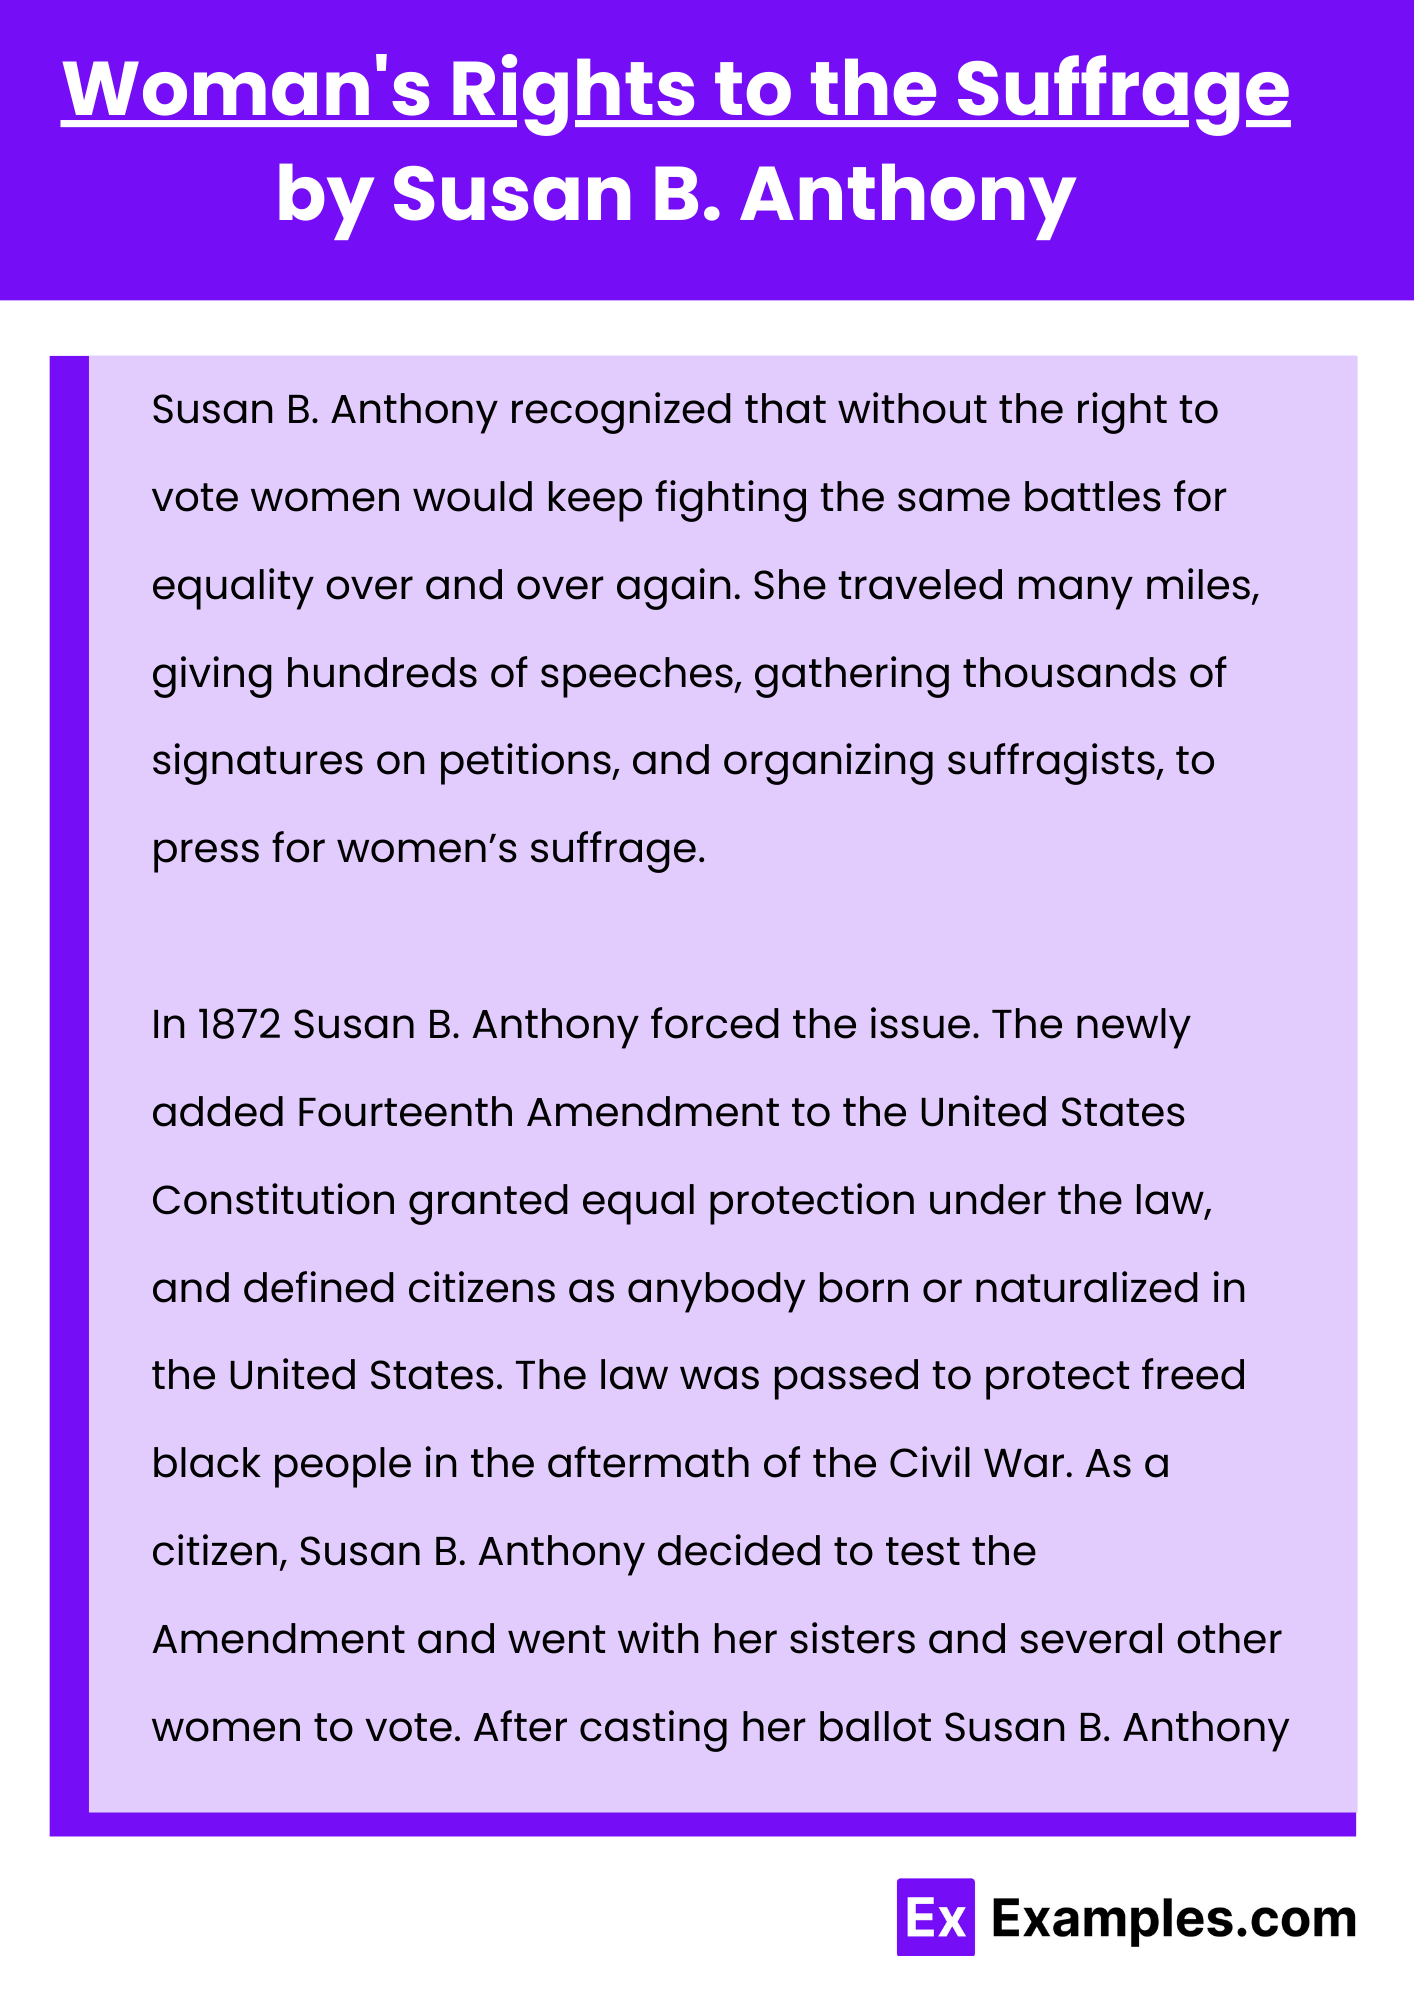 Woman's Rights to the Suffrage by Susan B. Anthony